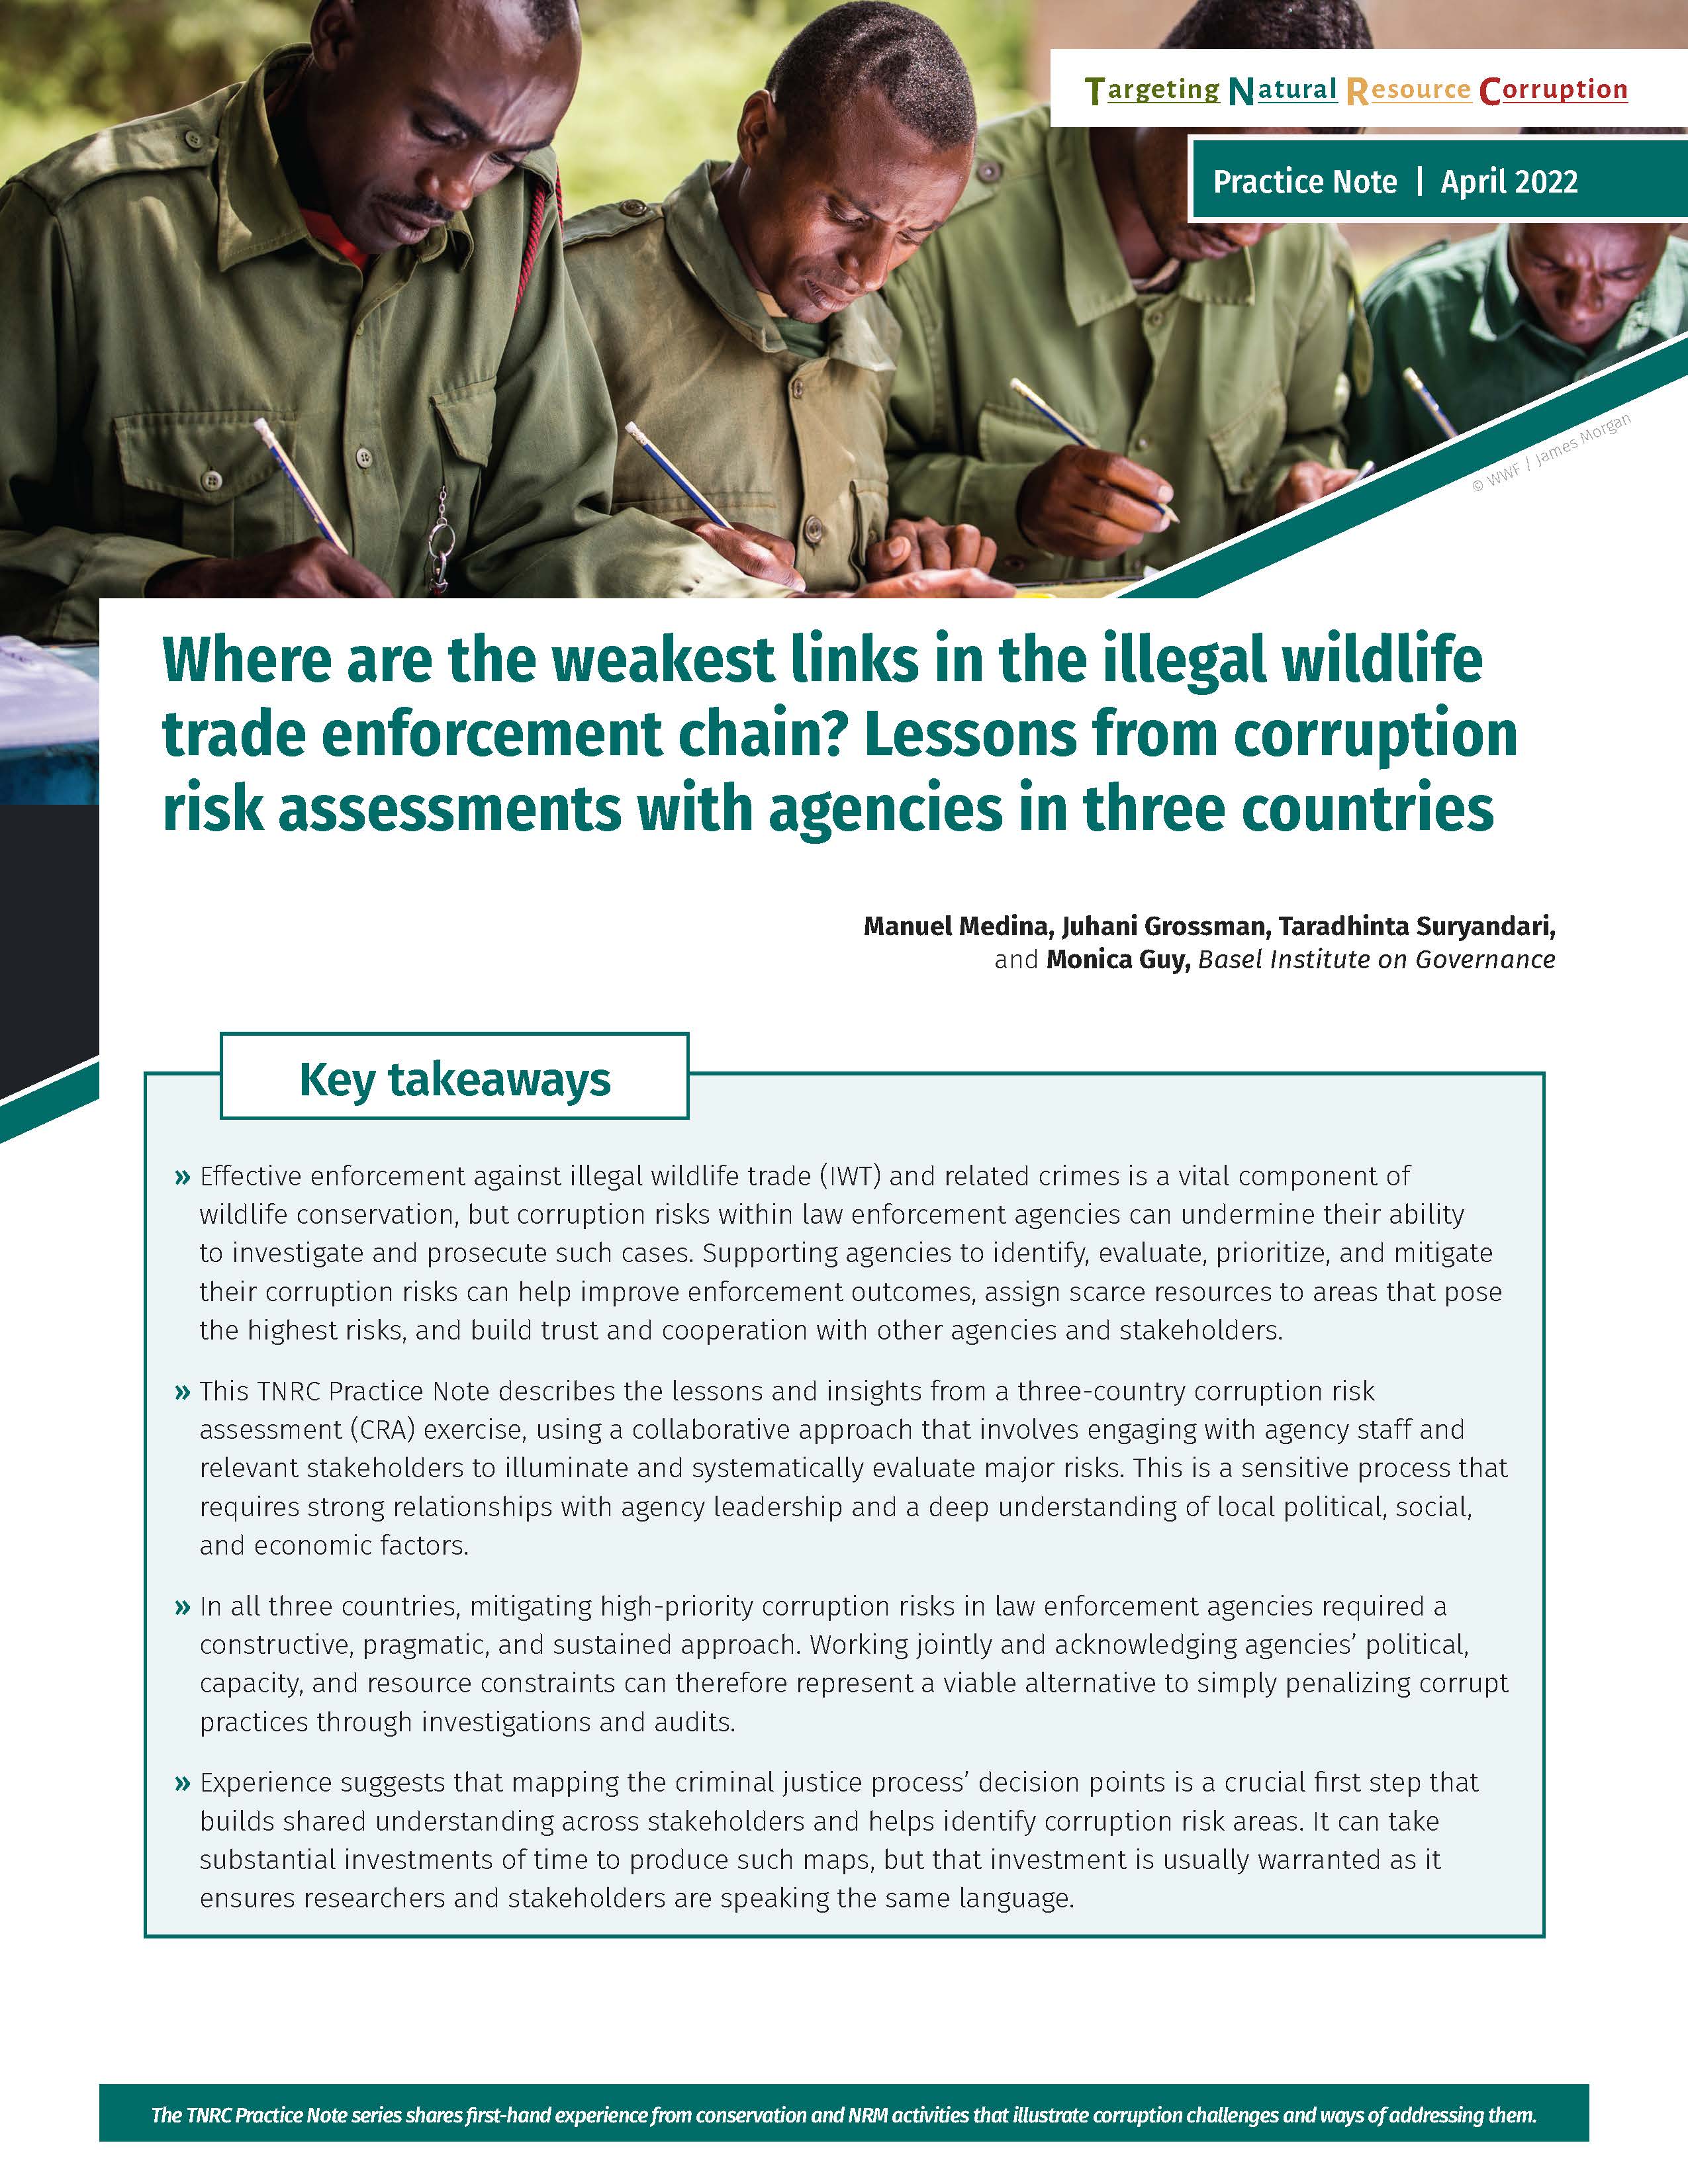 TNRC practice note on corruption risk assessments - cover page